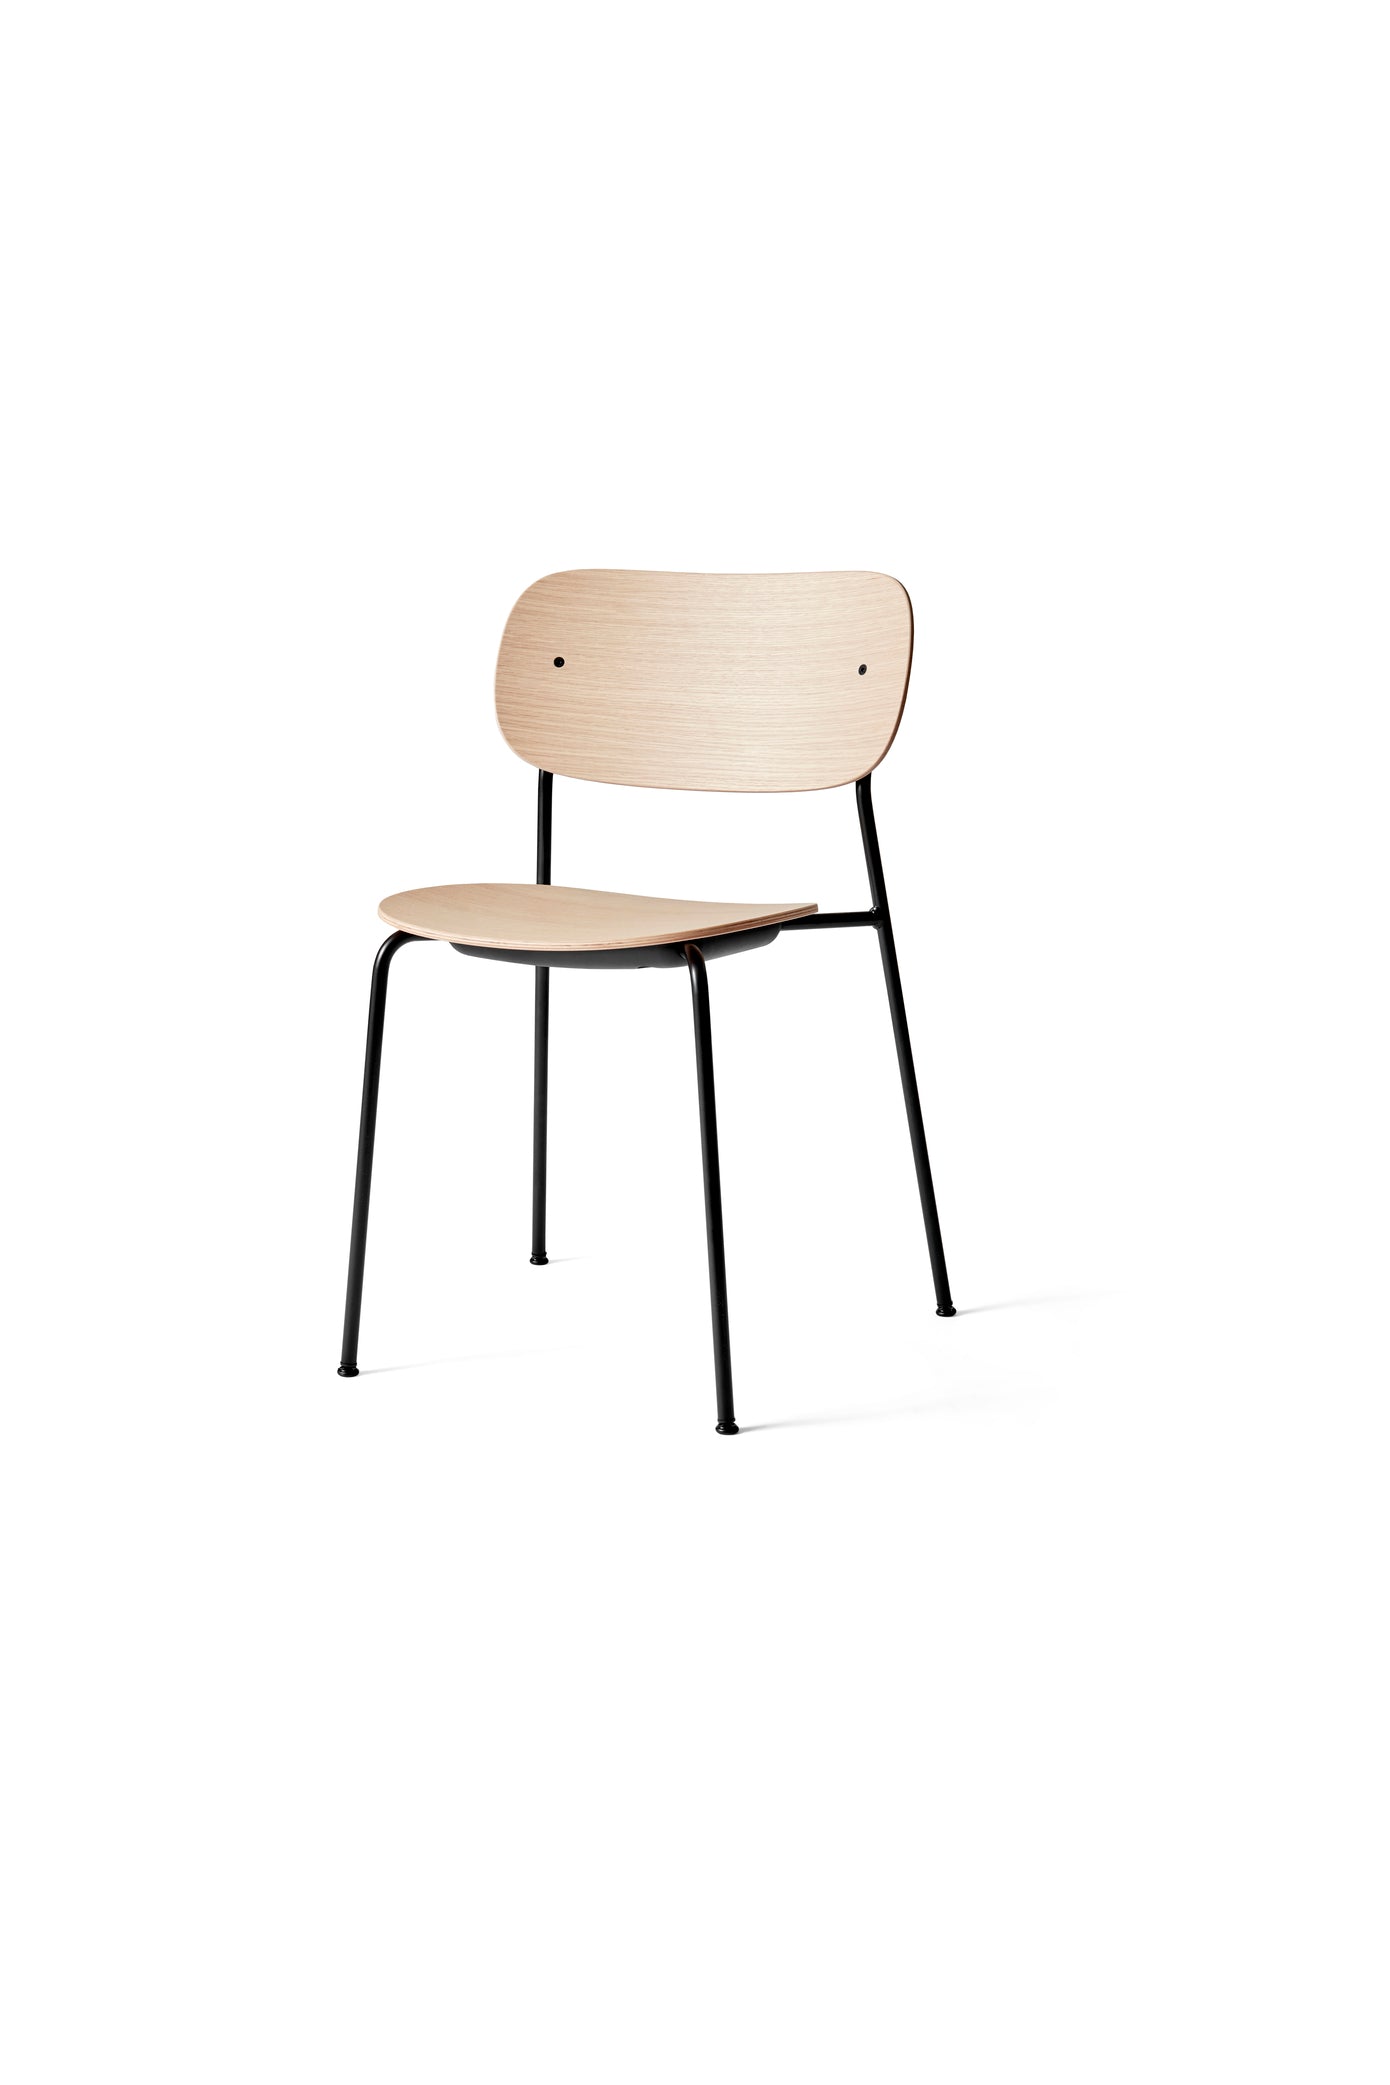 Co Dining Chair in Black Steel with Natural Oak by Audo Copenhagen